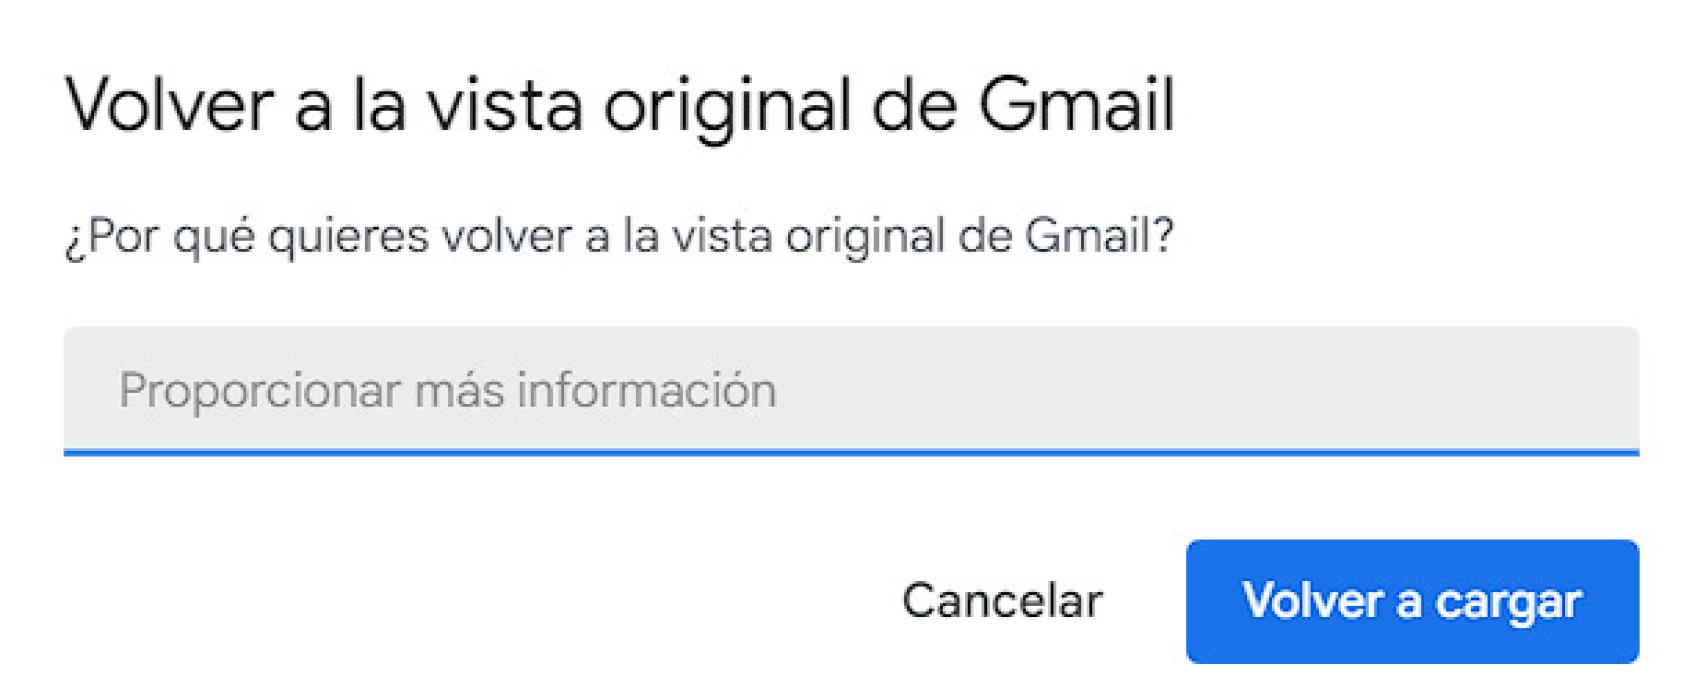 Go back to the original view of Gmail